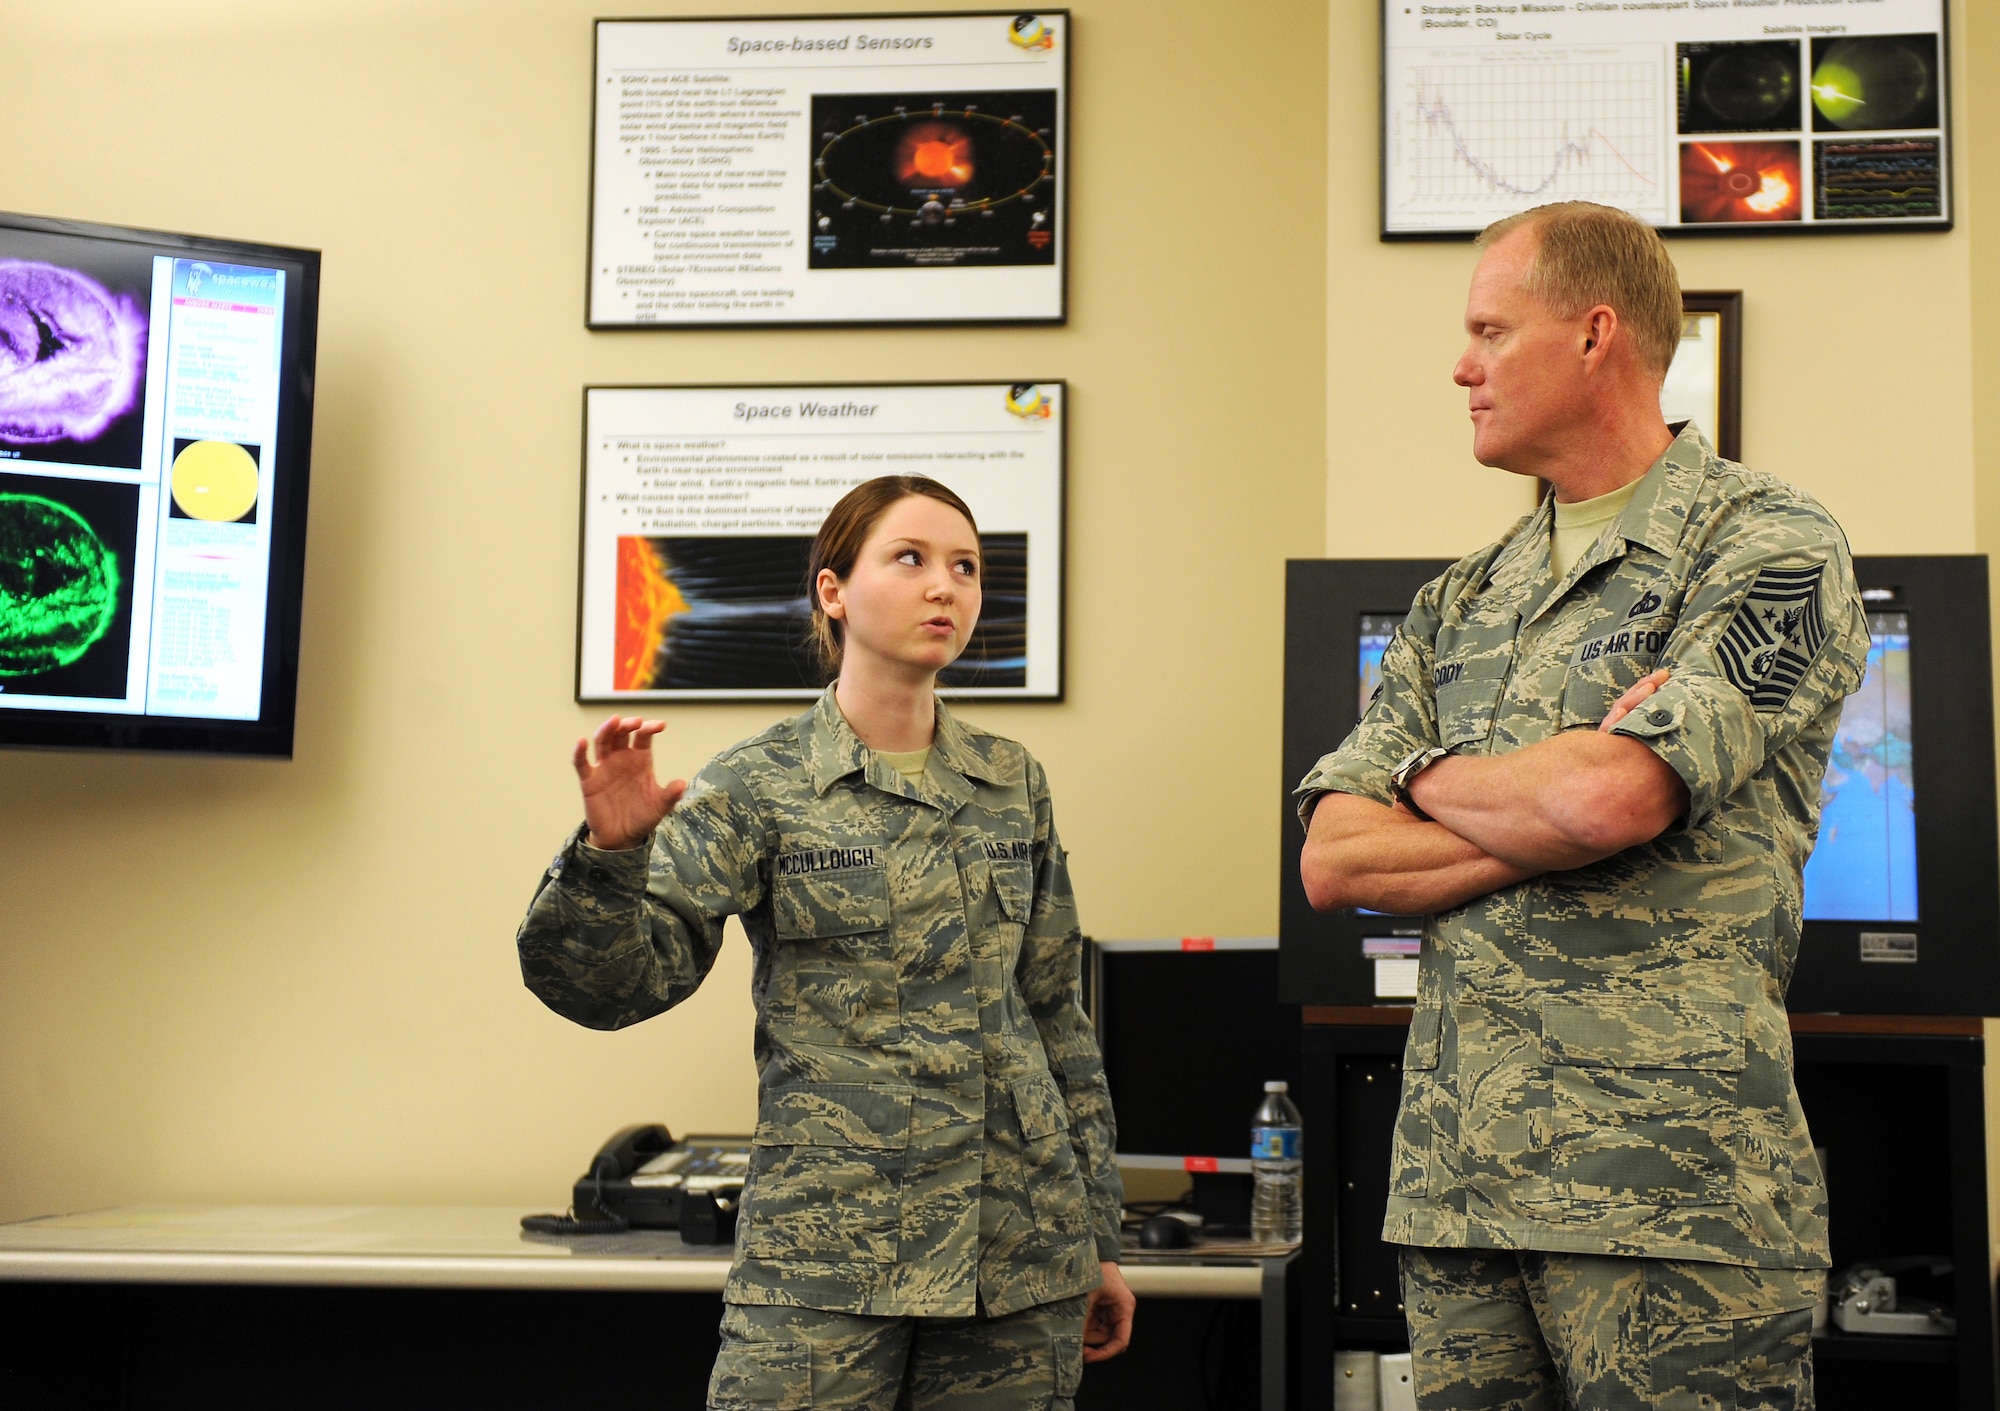 U.S. Air Force Senior Airman Robyn McCullough, 2d Weather Squadron, briefs Chief Master Sgt. of the Air Force James Cody on the role of solar weather in the Air Force March 11 at the Air Force Weather Agency, Offutt Air Force Base, Neb. This was Cody’s first visit to AFWA to hear about its unique mission. (U.S. Air Force photo by Josh Plueger)